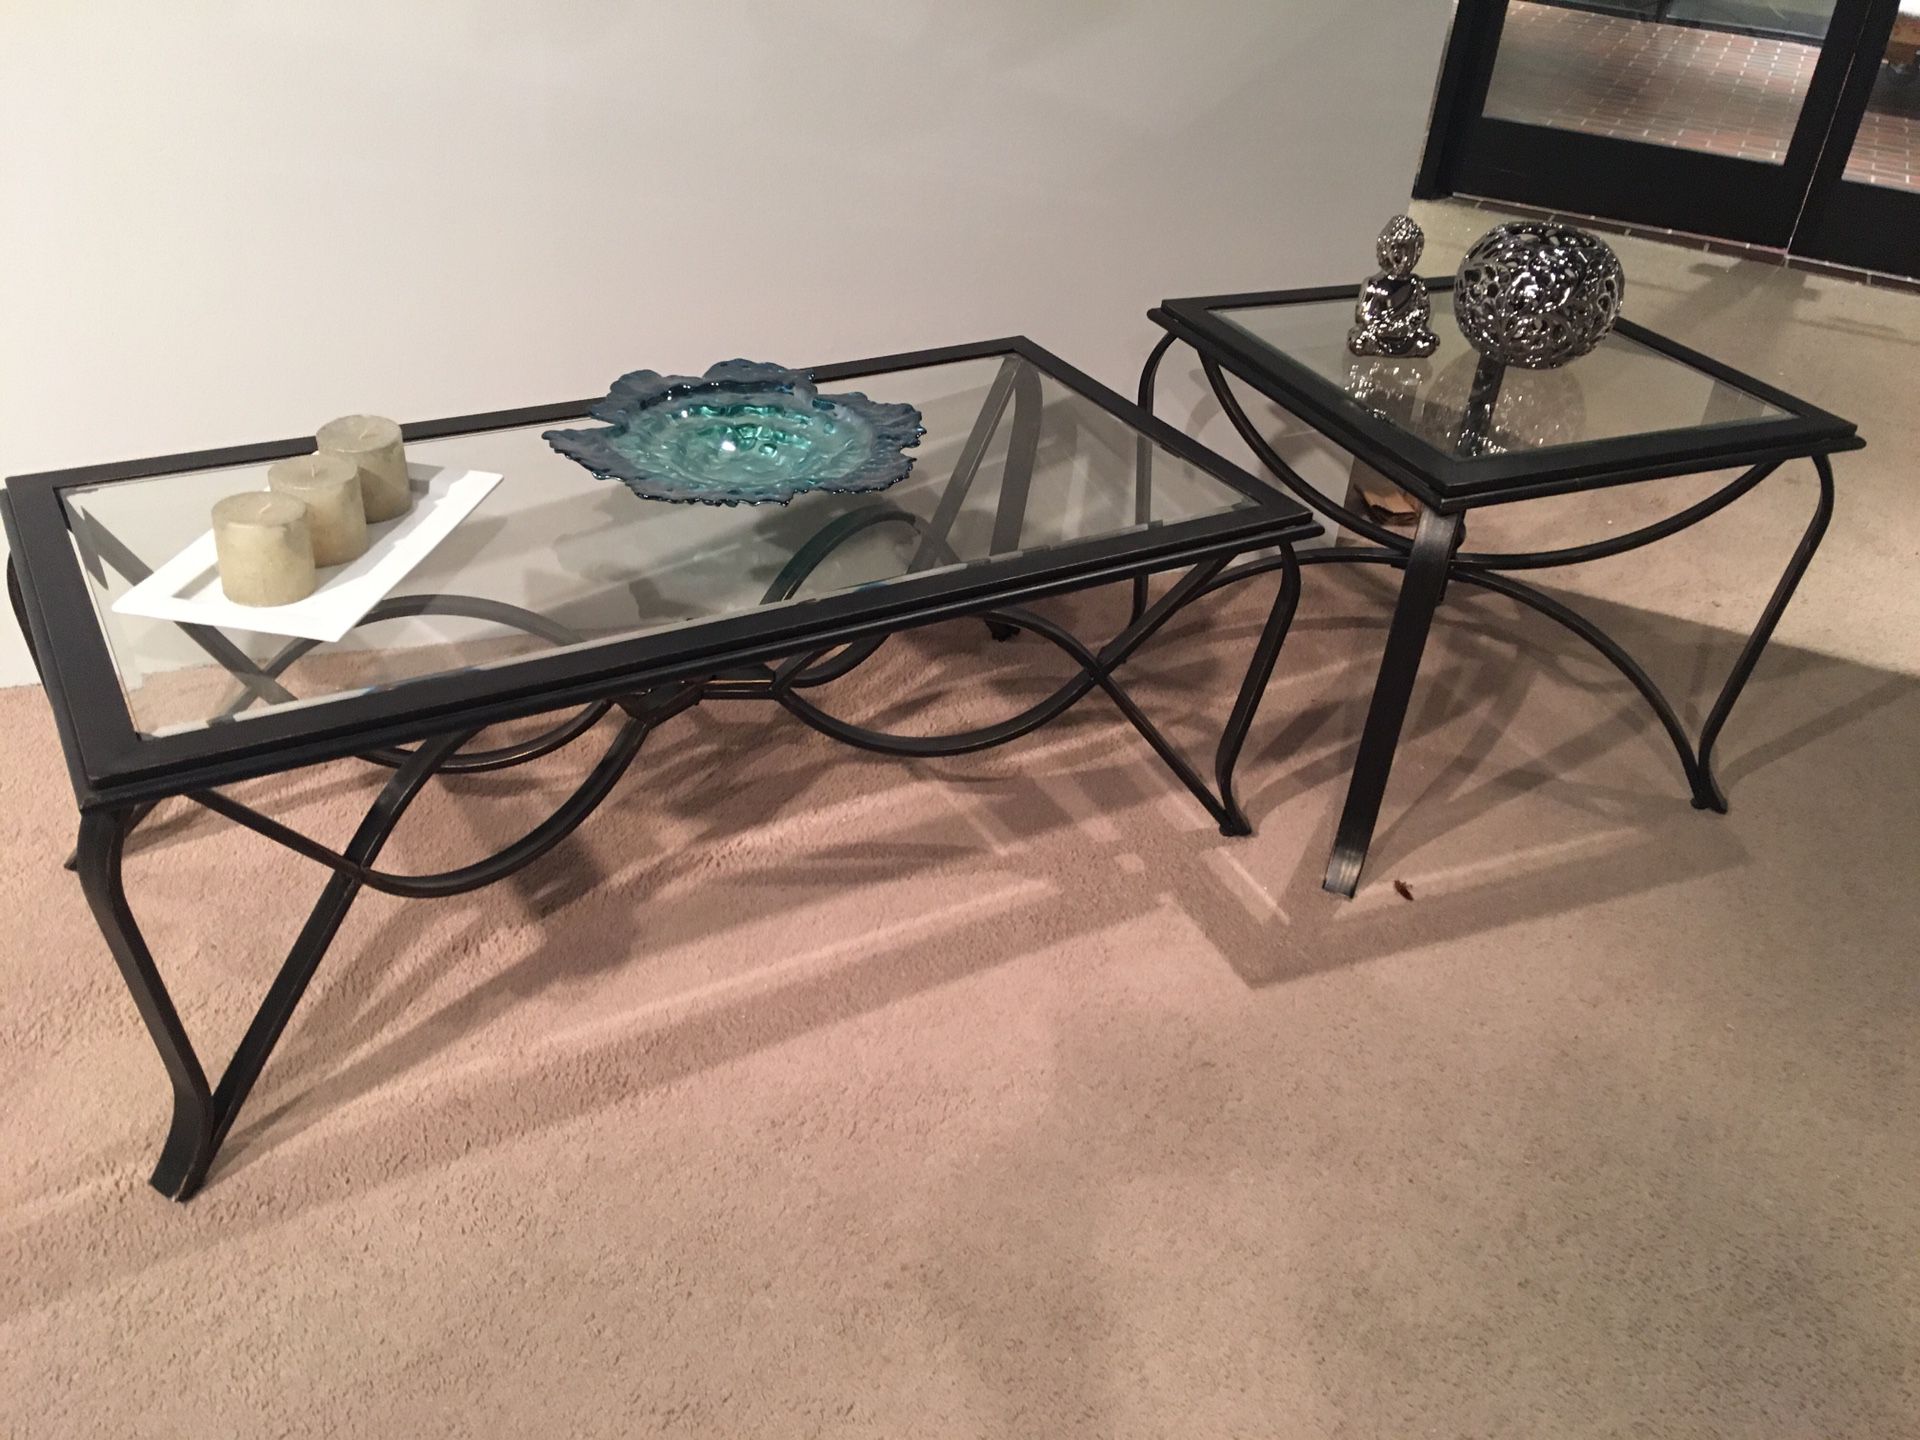 New coffee table with one end table showroom sample